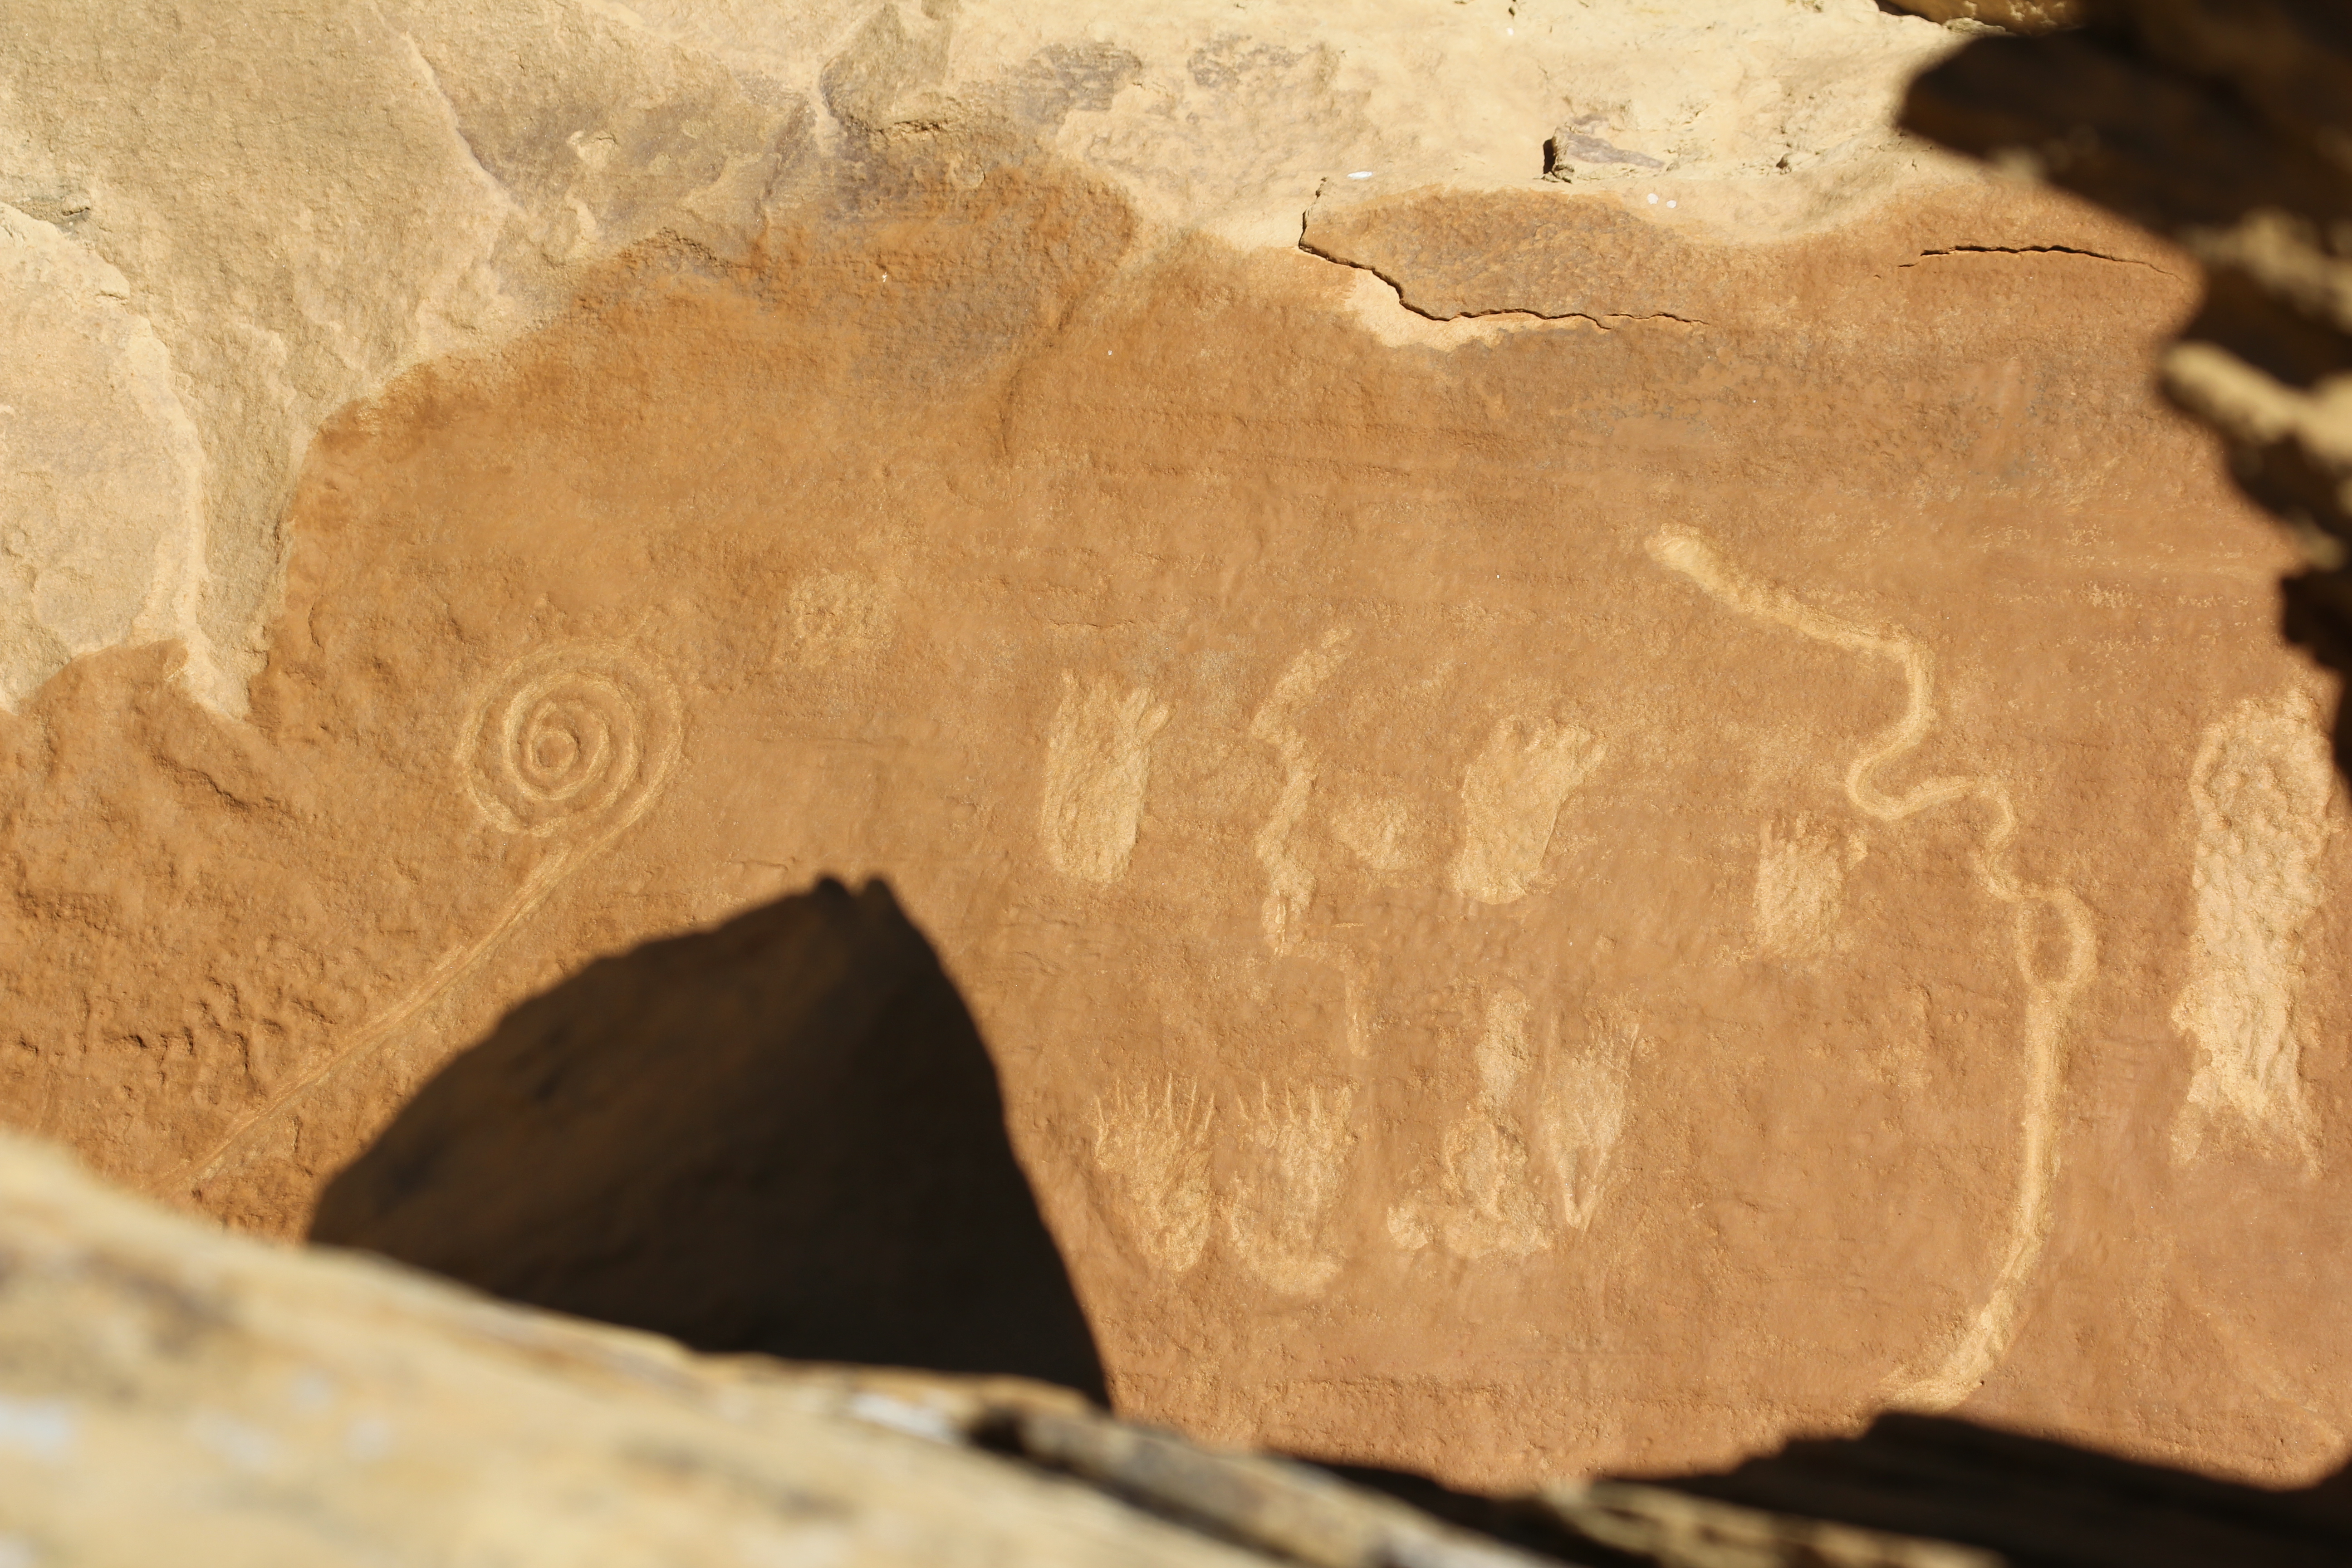 Petroglyphs at Gallo campground in Chaco Canyon